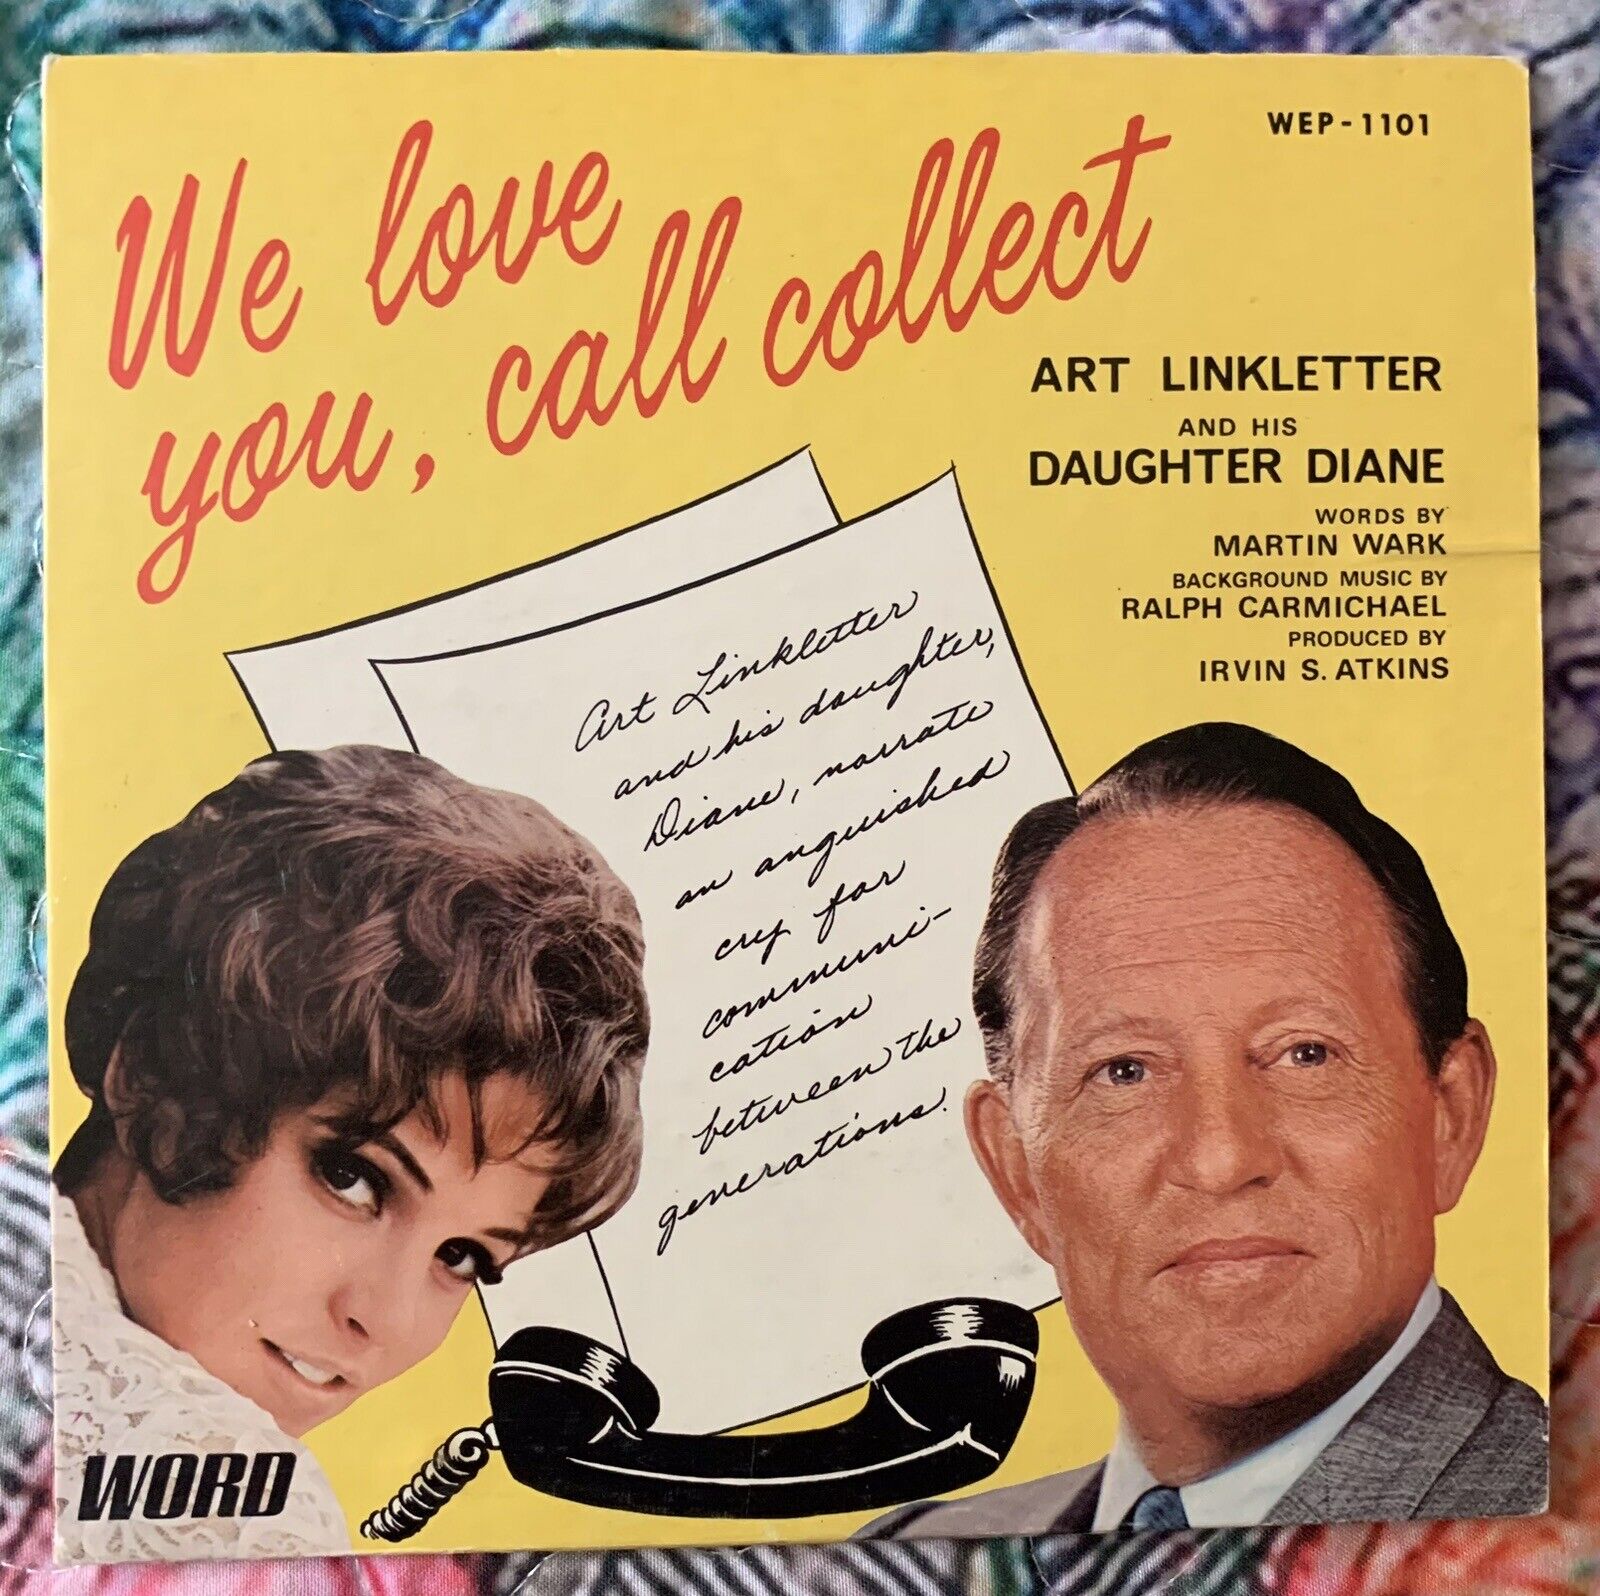 Art Linkletter-We Love You, Call Collect-Scarce 1969 E.P. Word WEP-1101